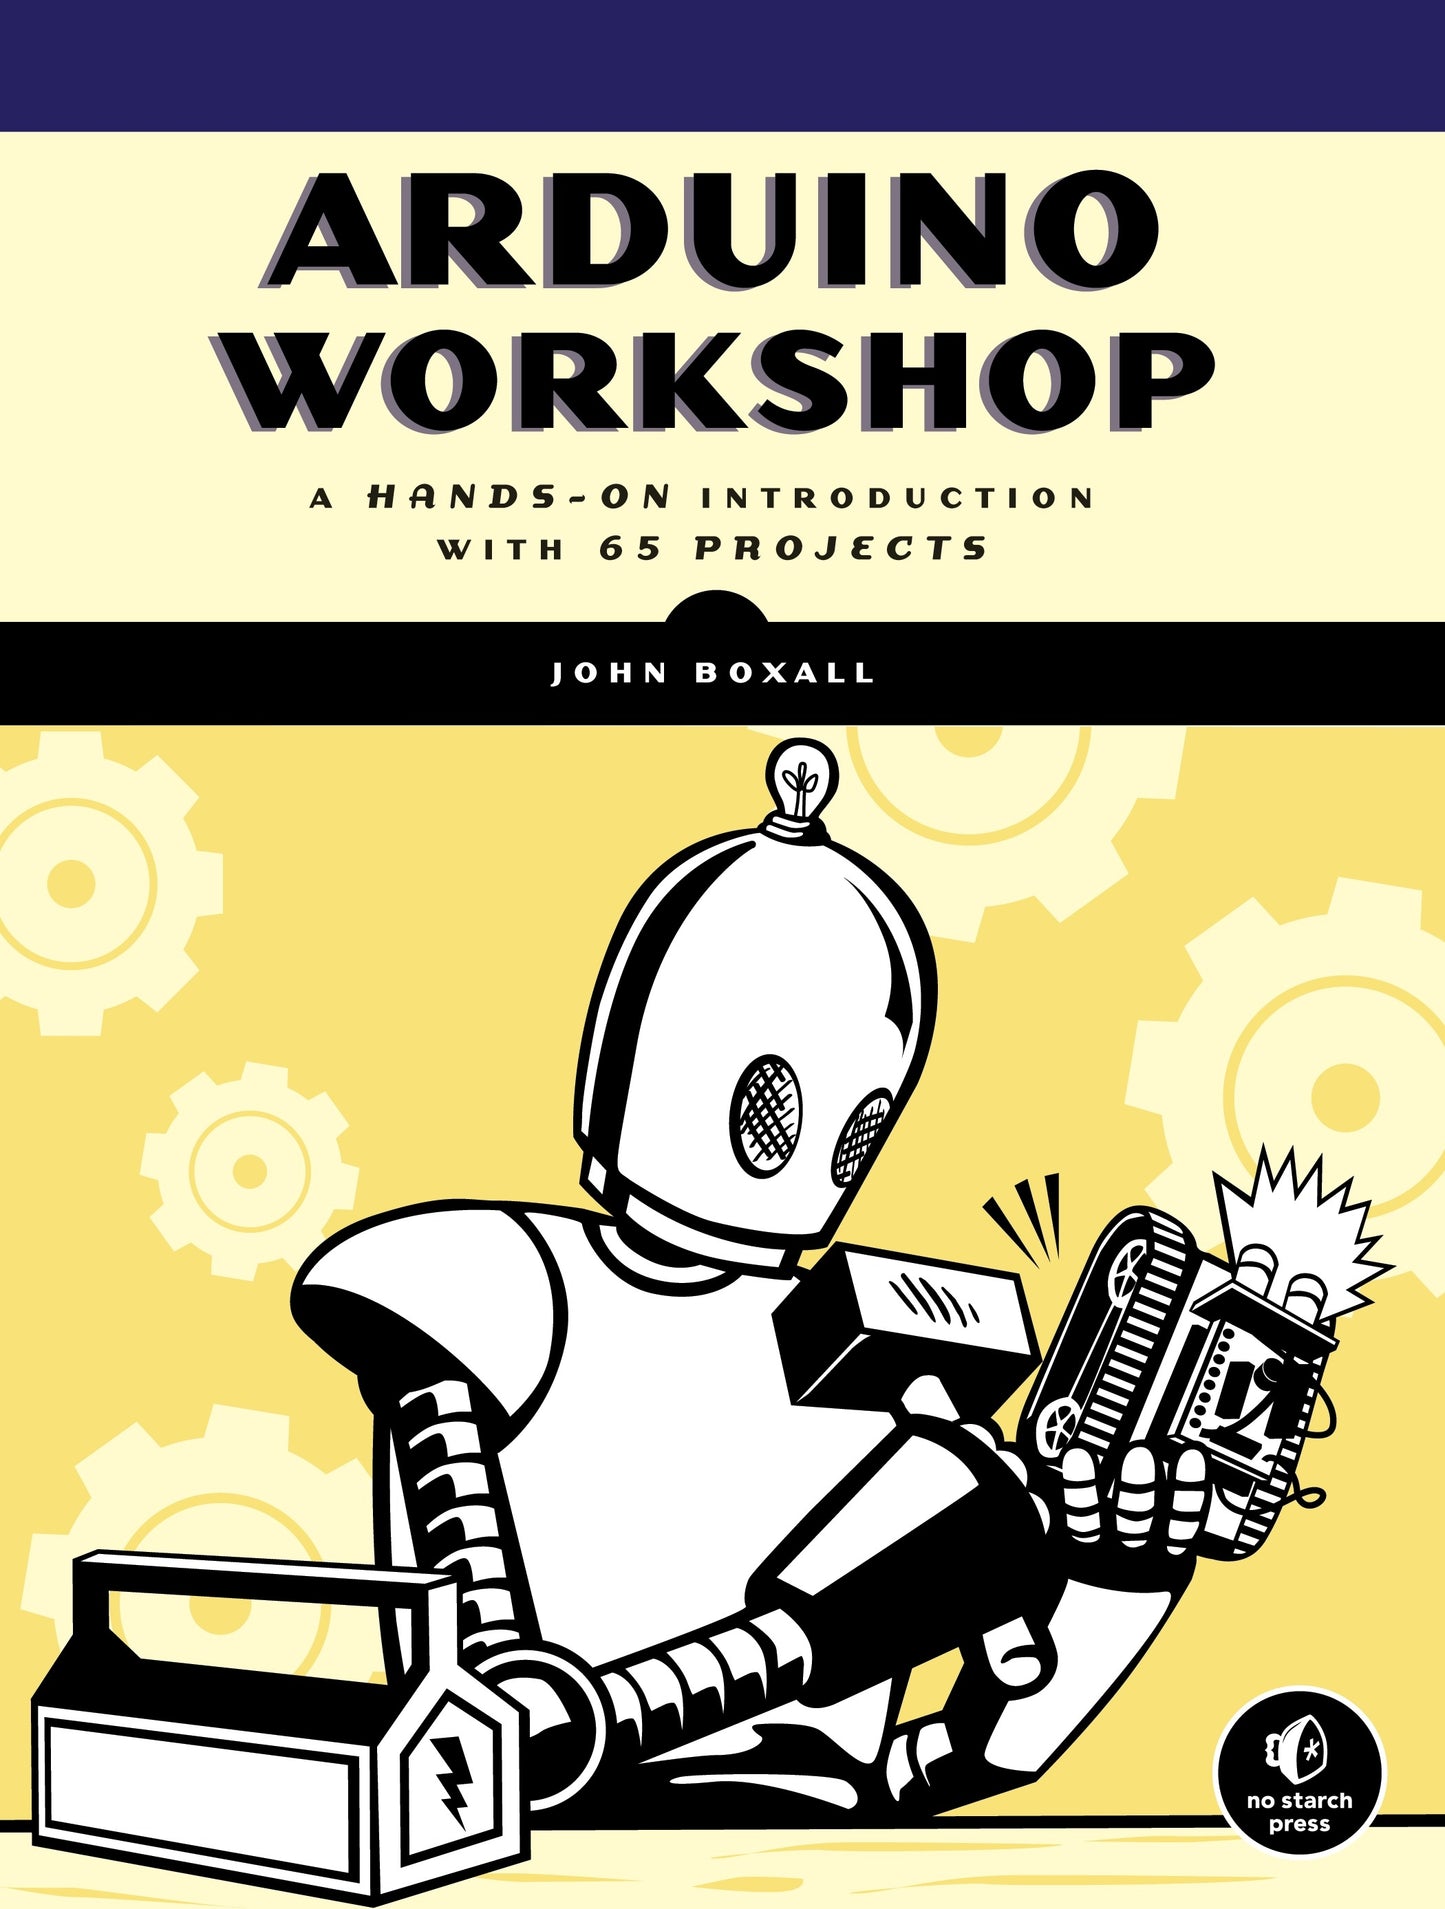 Arduino Workshop Book, Microcontroller Programming, Digital Technology Education, Computer Science Teaching Resource, Electronics Learning, Hands-On Projects, DIY Gadgets, Arduino Toys and Games, Digital Technology Book, Digital Technology Resource, Computer Science Book, Electronics Book